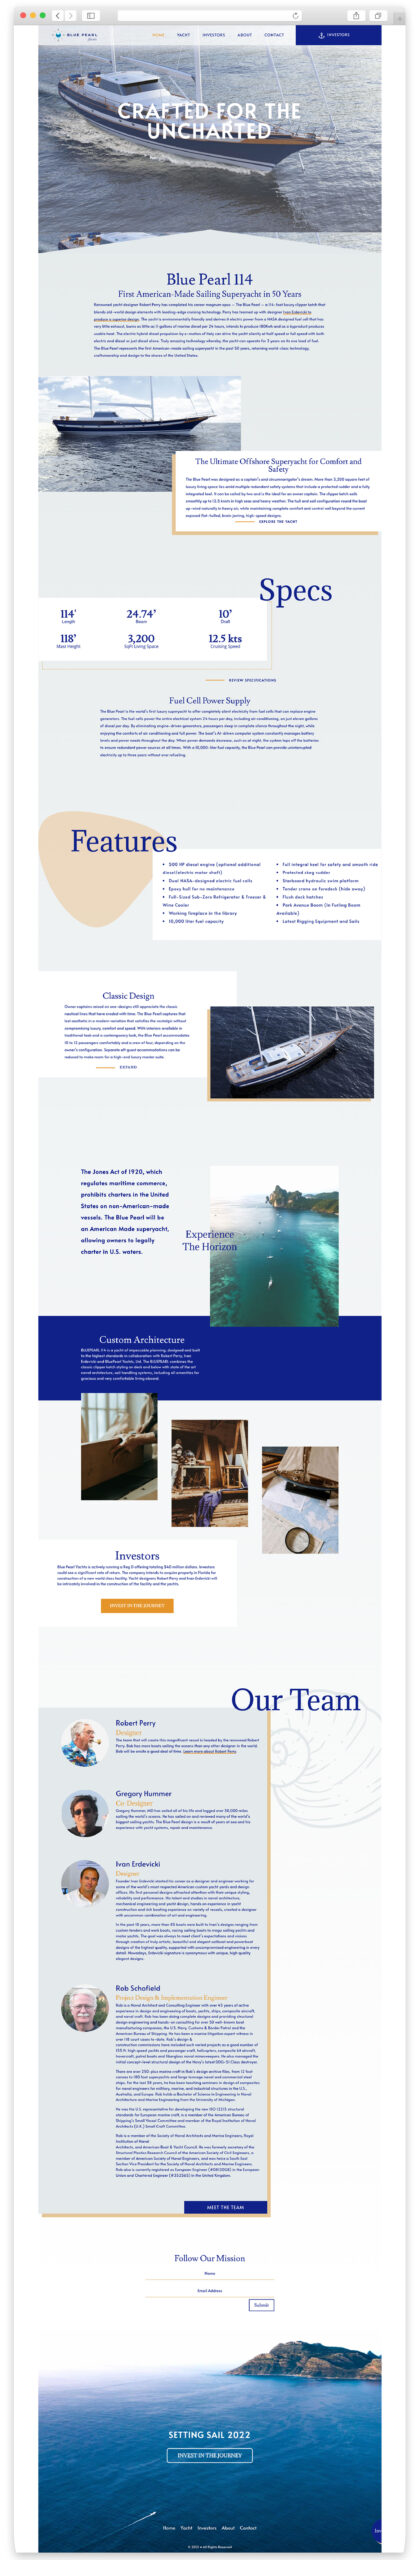 Website designed by Acclaim for Blue Pearl Yachts in Cleveland.